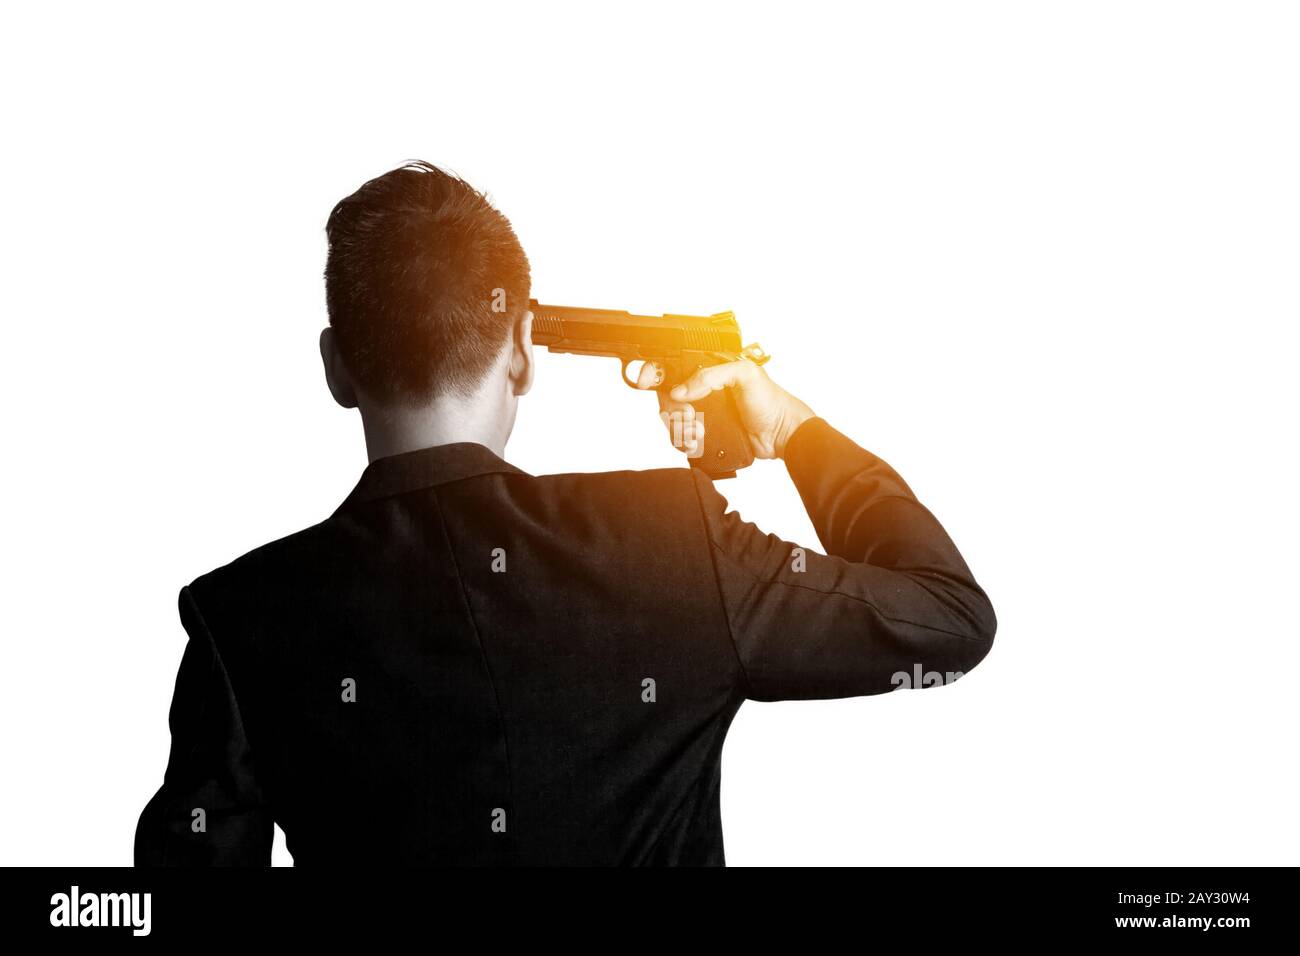 man with pistol gun turned on his head wants to commit suicide Stock Photo